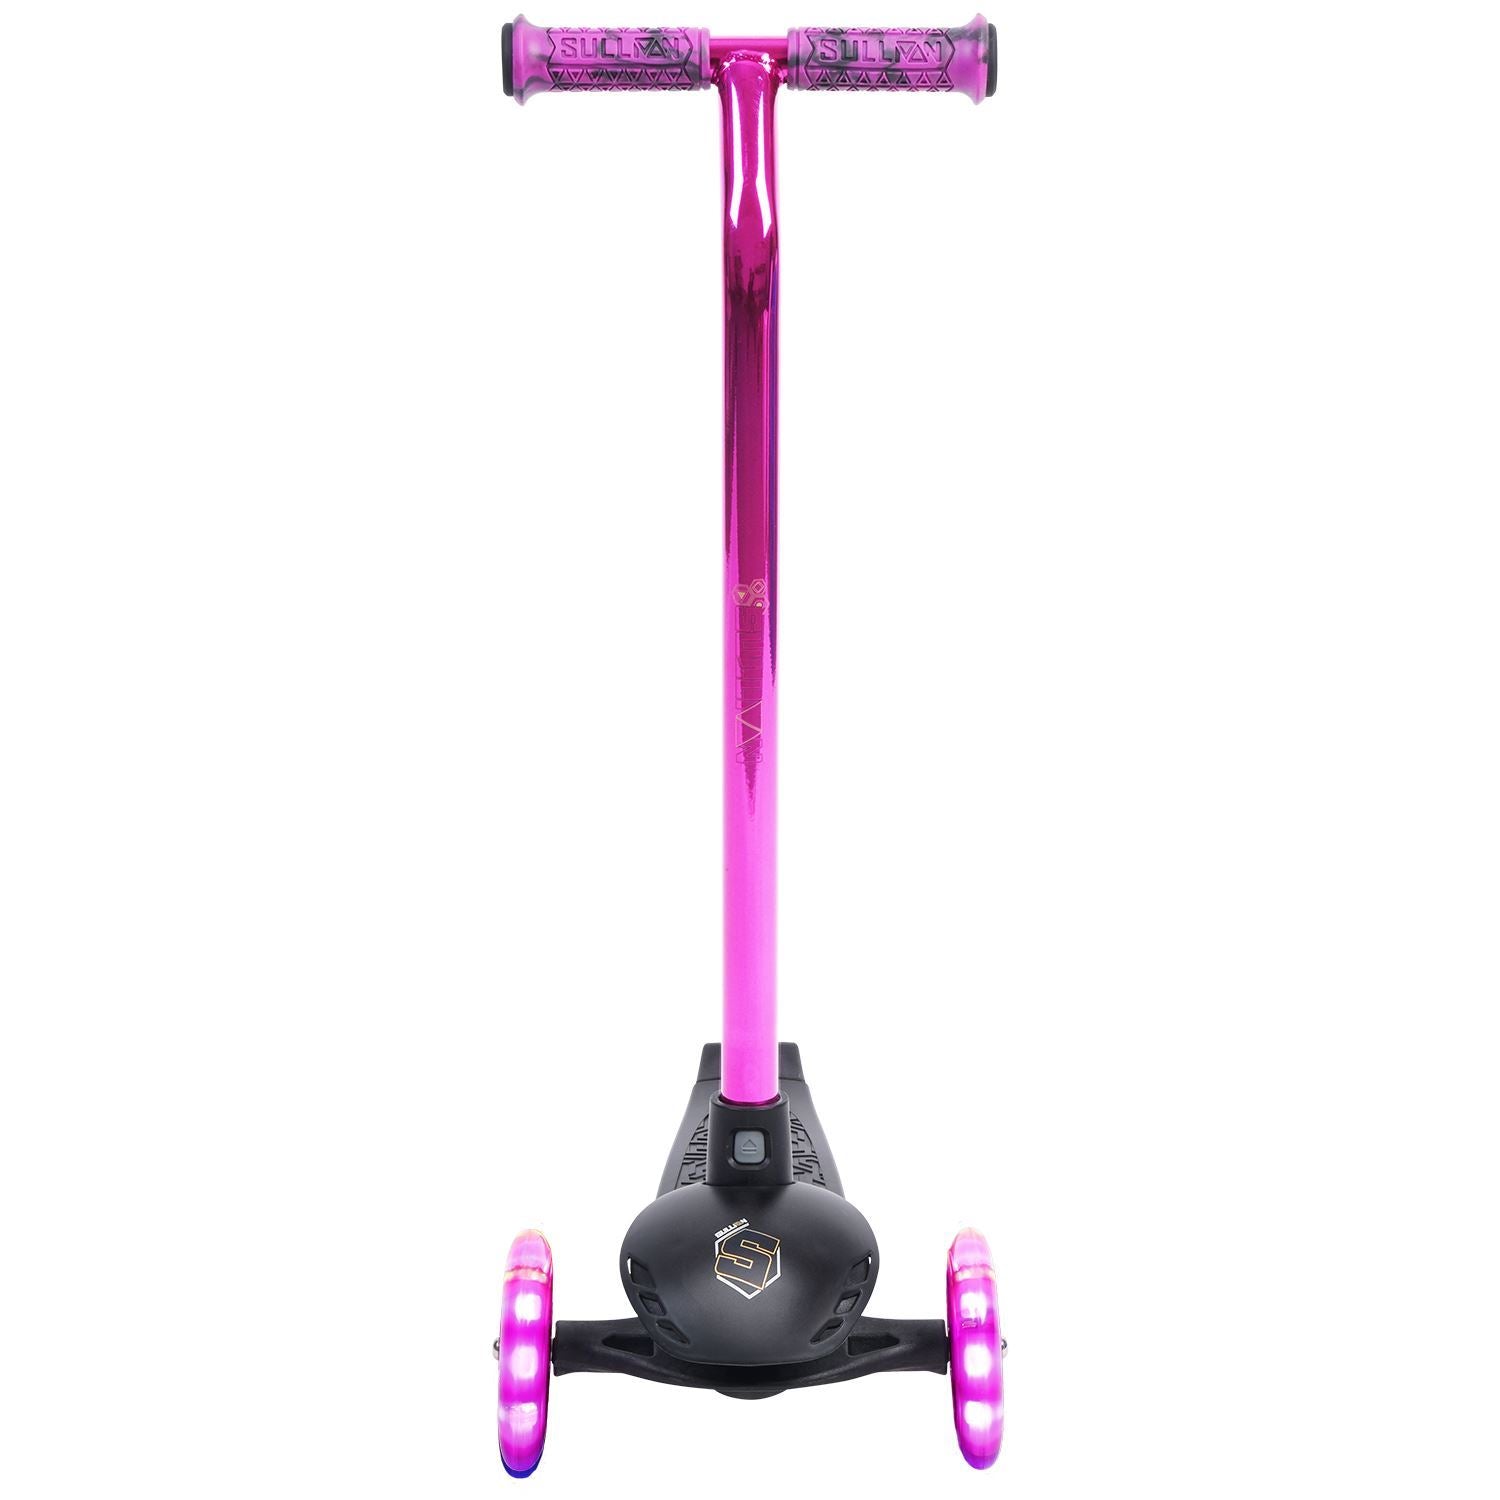 Sullivan Lean N Glide Tri Scooter - Kick Scooter Pink Black Front View